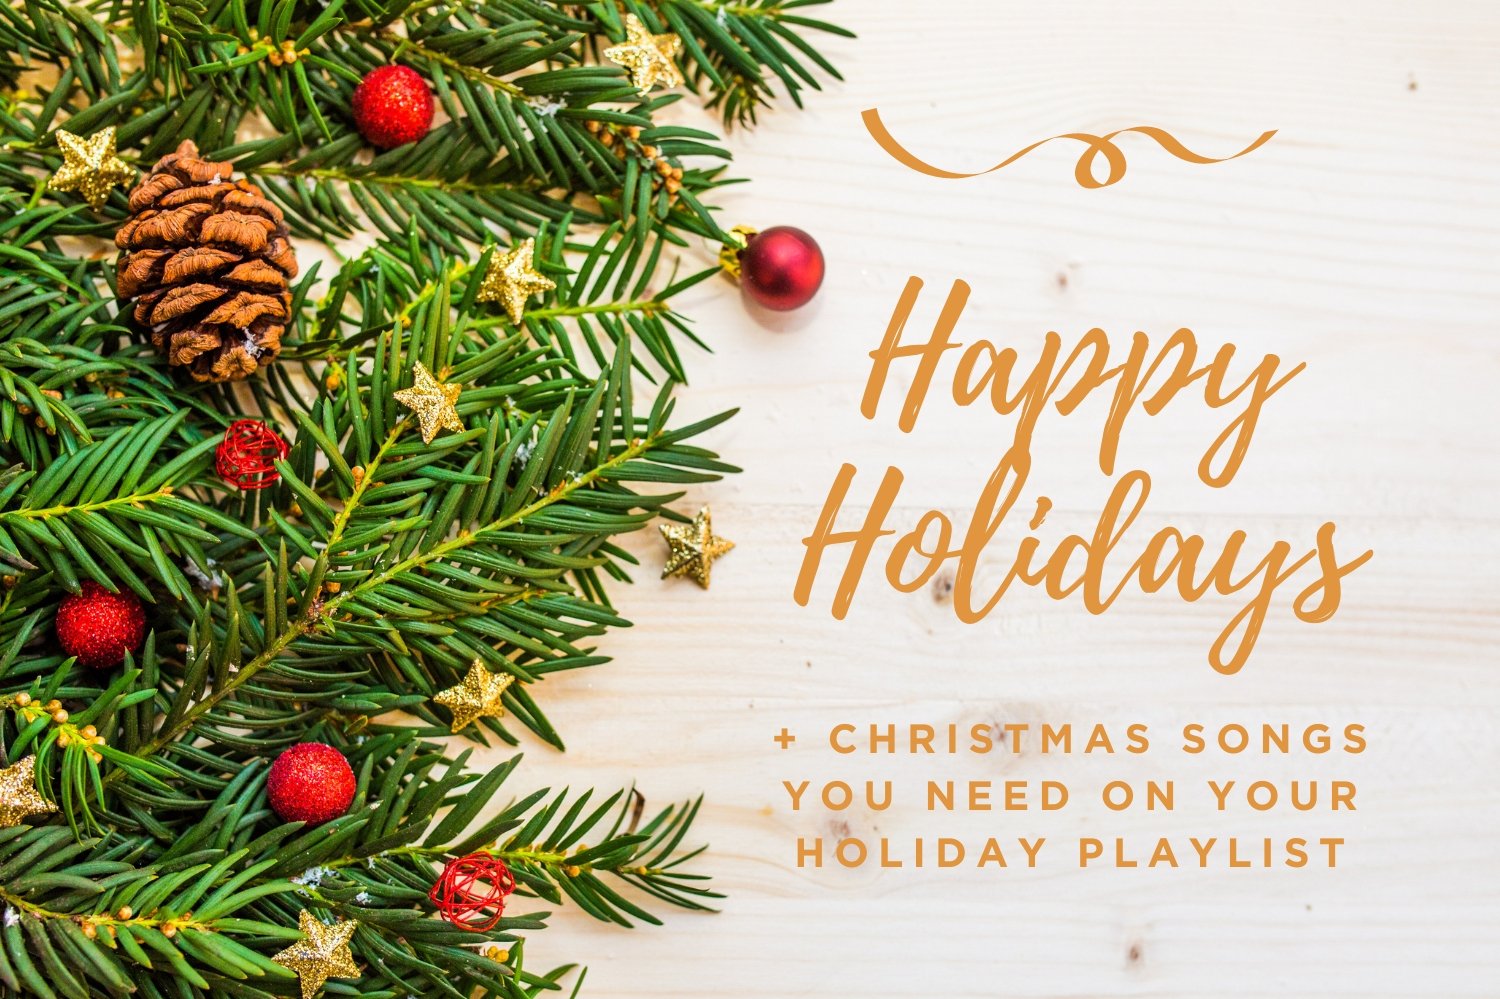 Happy Holidays From SafetyLine and a Christmas Music Playlist